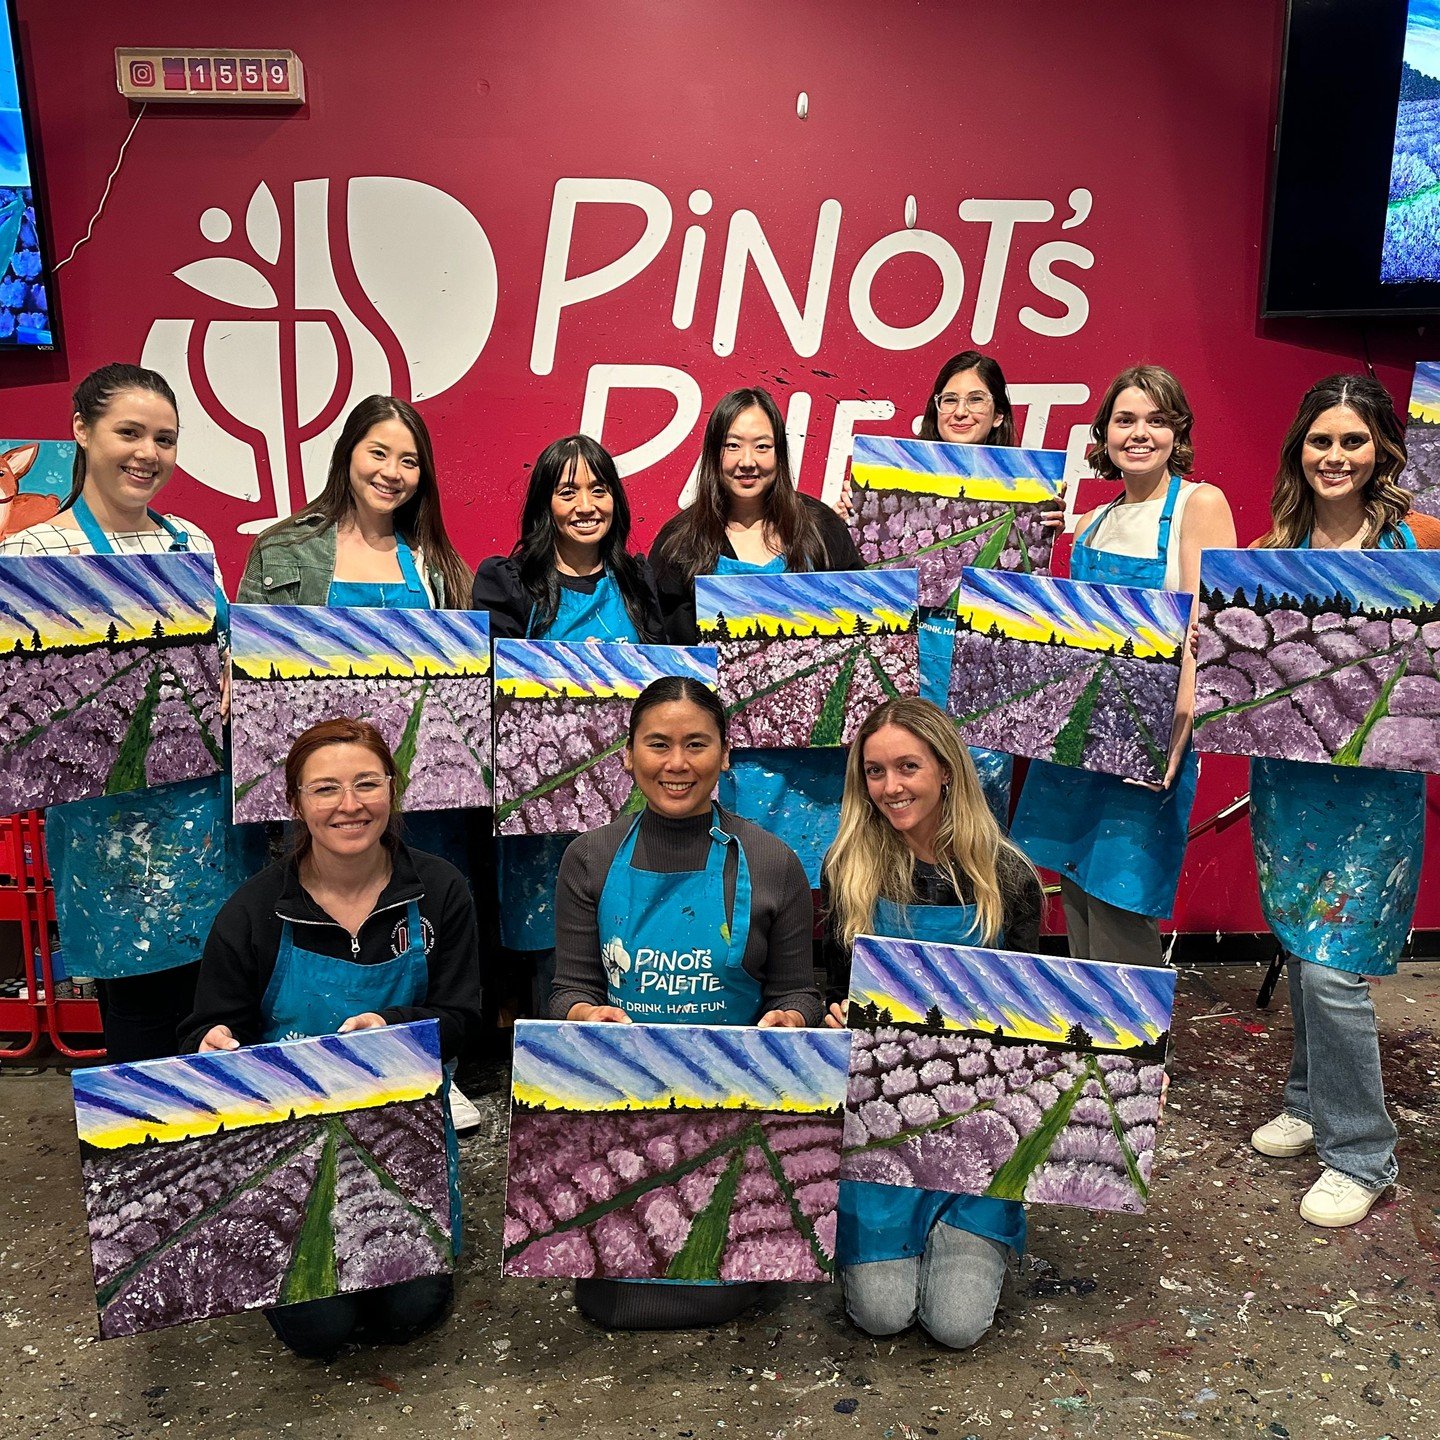 Our wonderful female law clerks and attorneys went to Pinot's Palette last night! Looks like they had a blast 🎨🍷